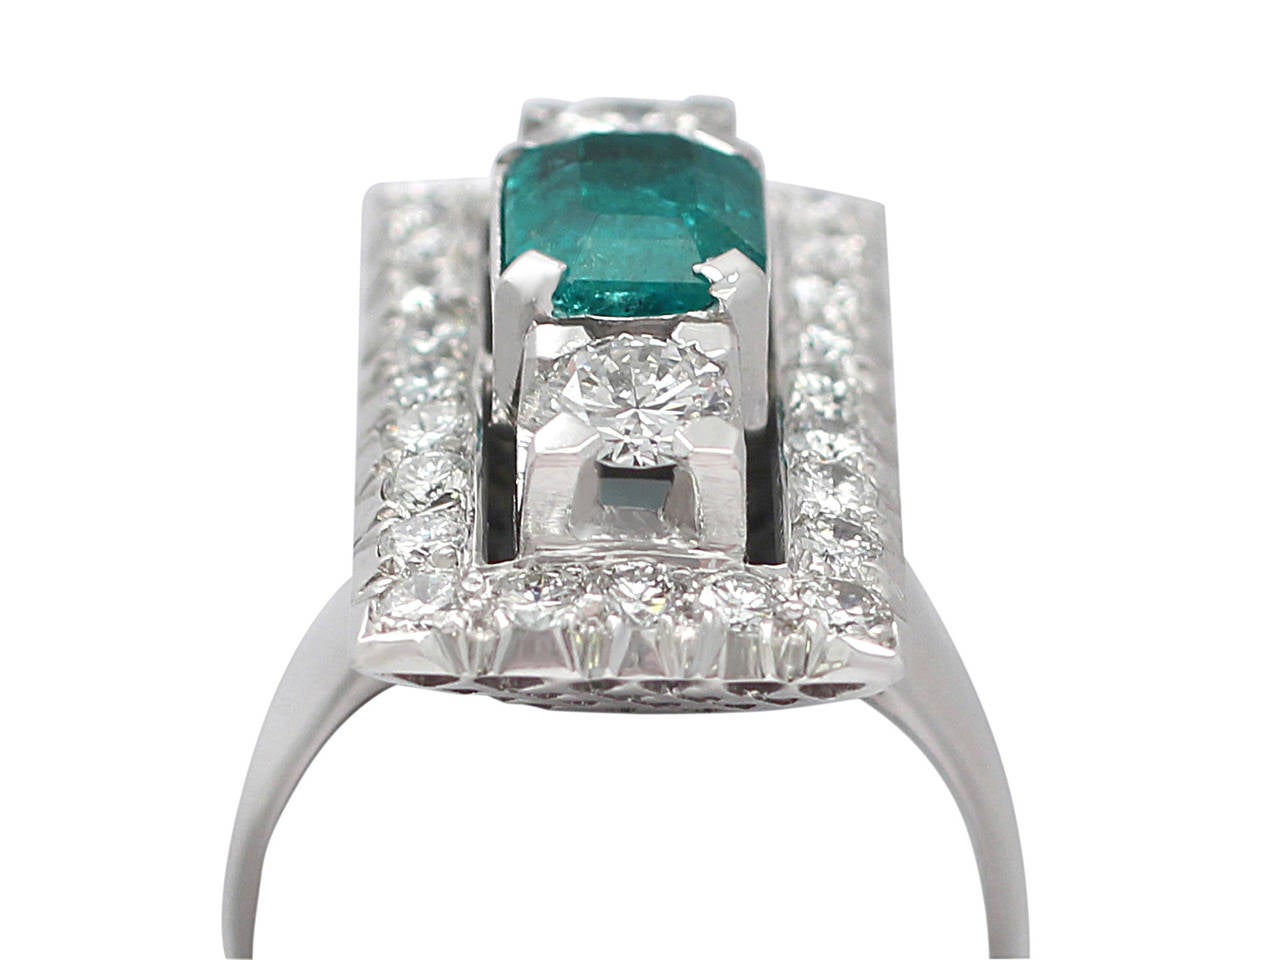 A stunning, fine and impressive 1.07 carat natural emerald and 1.78 carat diamond, 18 karat white gold, platinum set Art Deco ring; part of our diverse range of emerald jewellery

This stunning vintage French Art Deco dress ring has been crafted